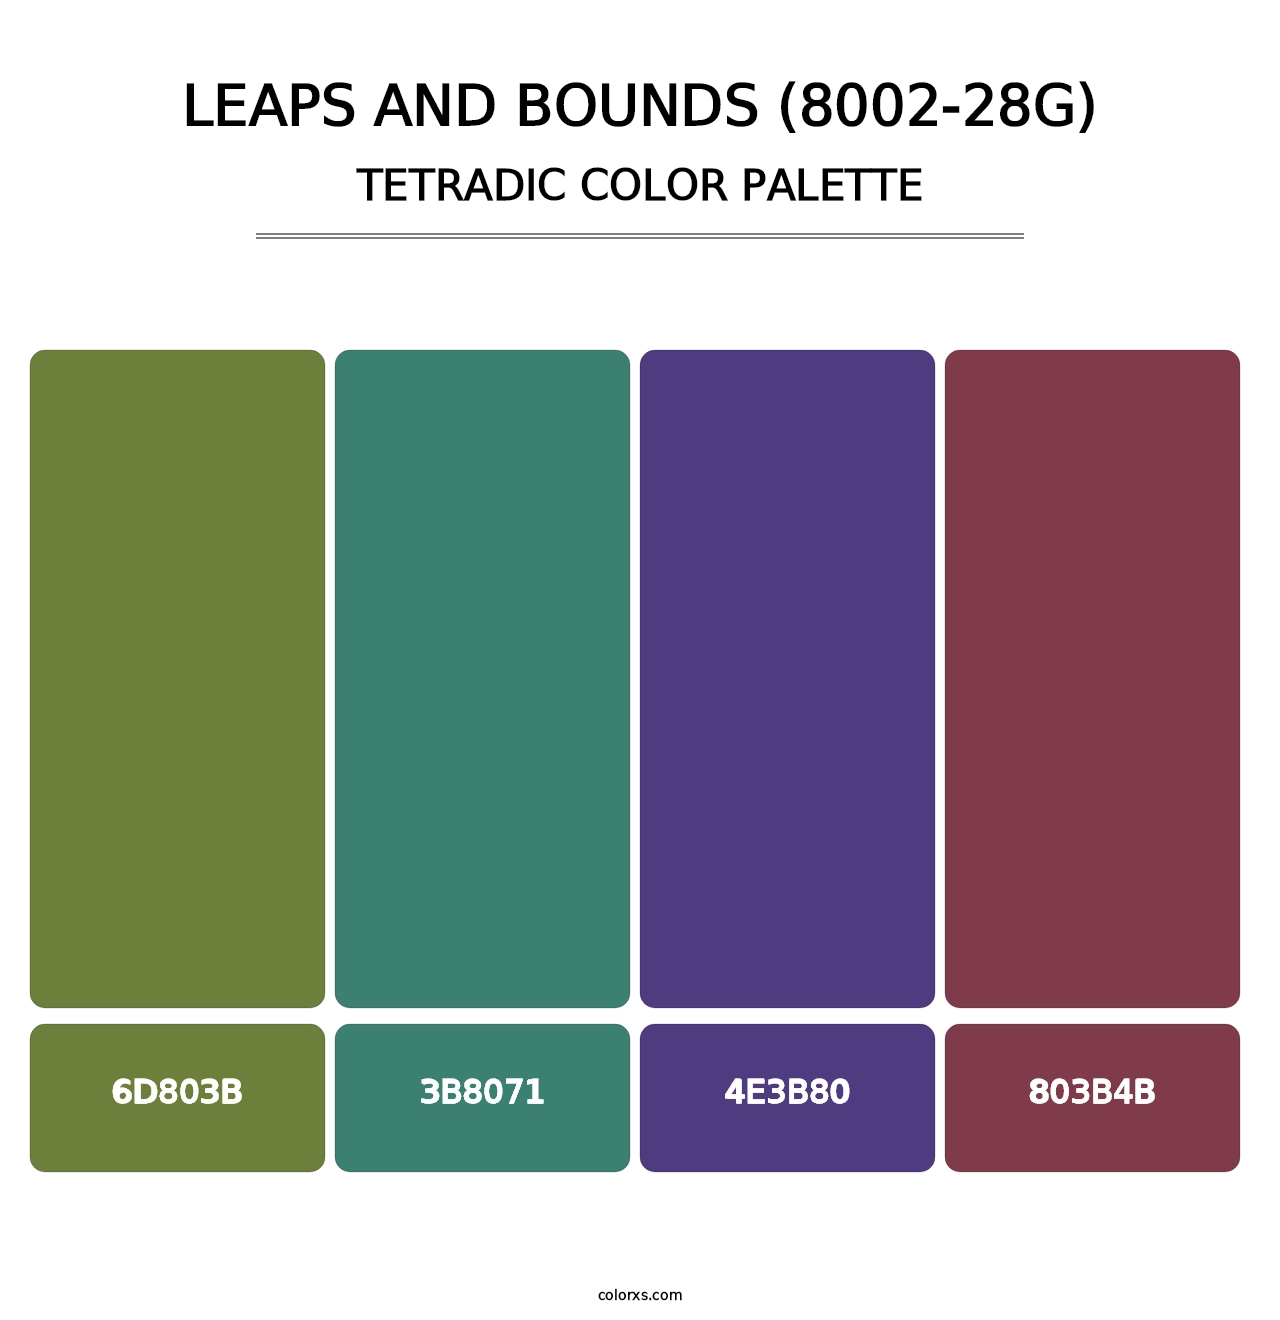 Leaps and Bounds (8002-28G) - Tetradic Color Palette